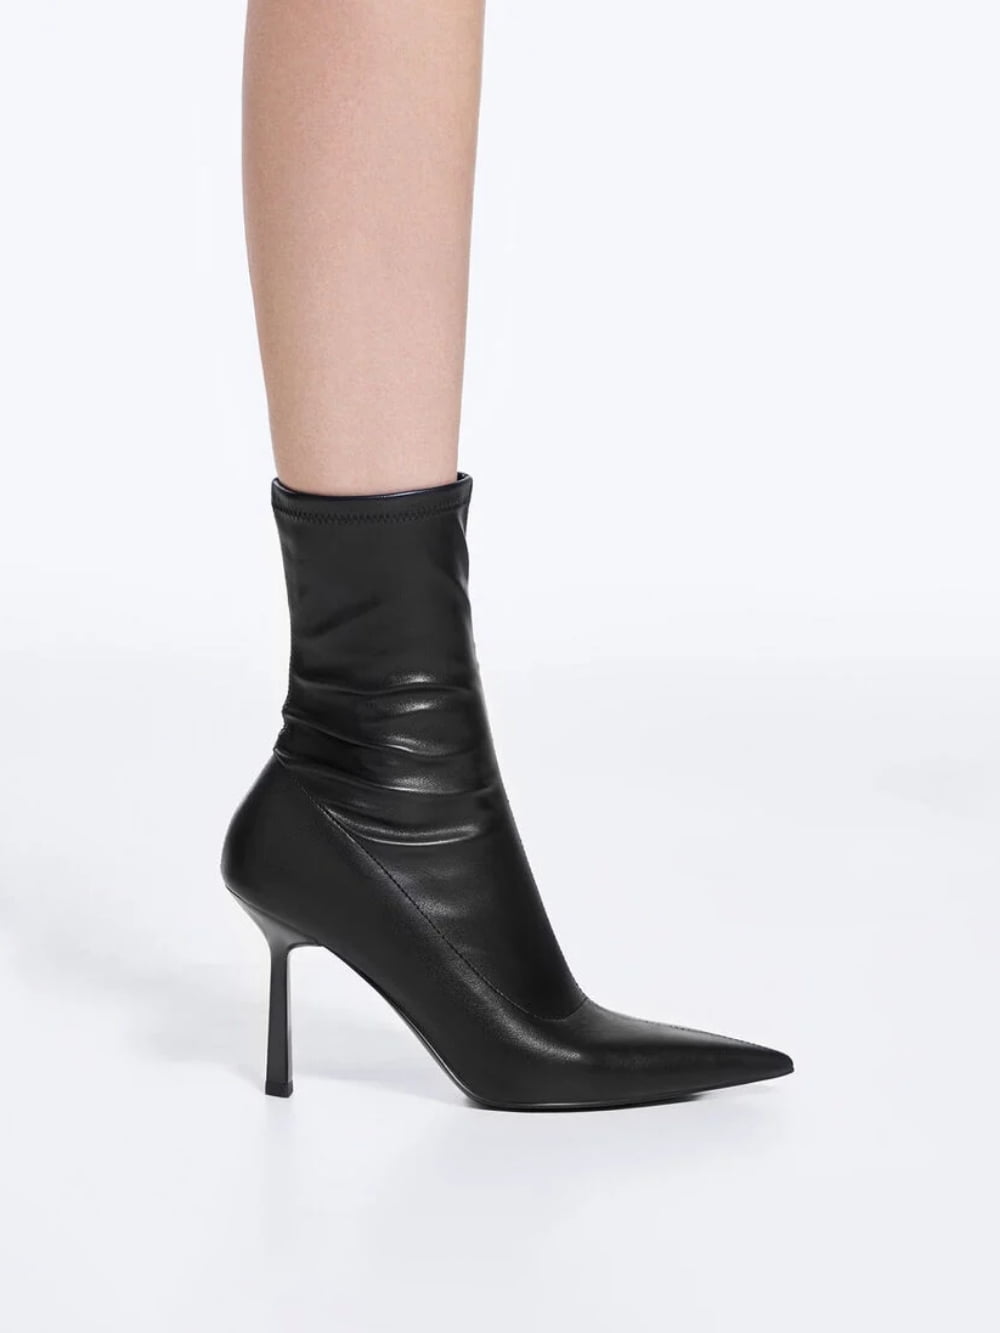 Women’s black pointed-toe stiletto heel ankle boots - CHARLES & KEITH